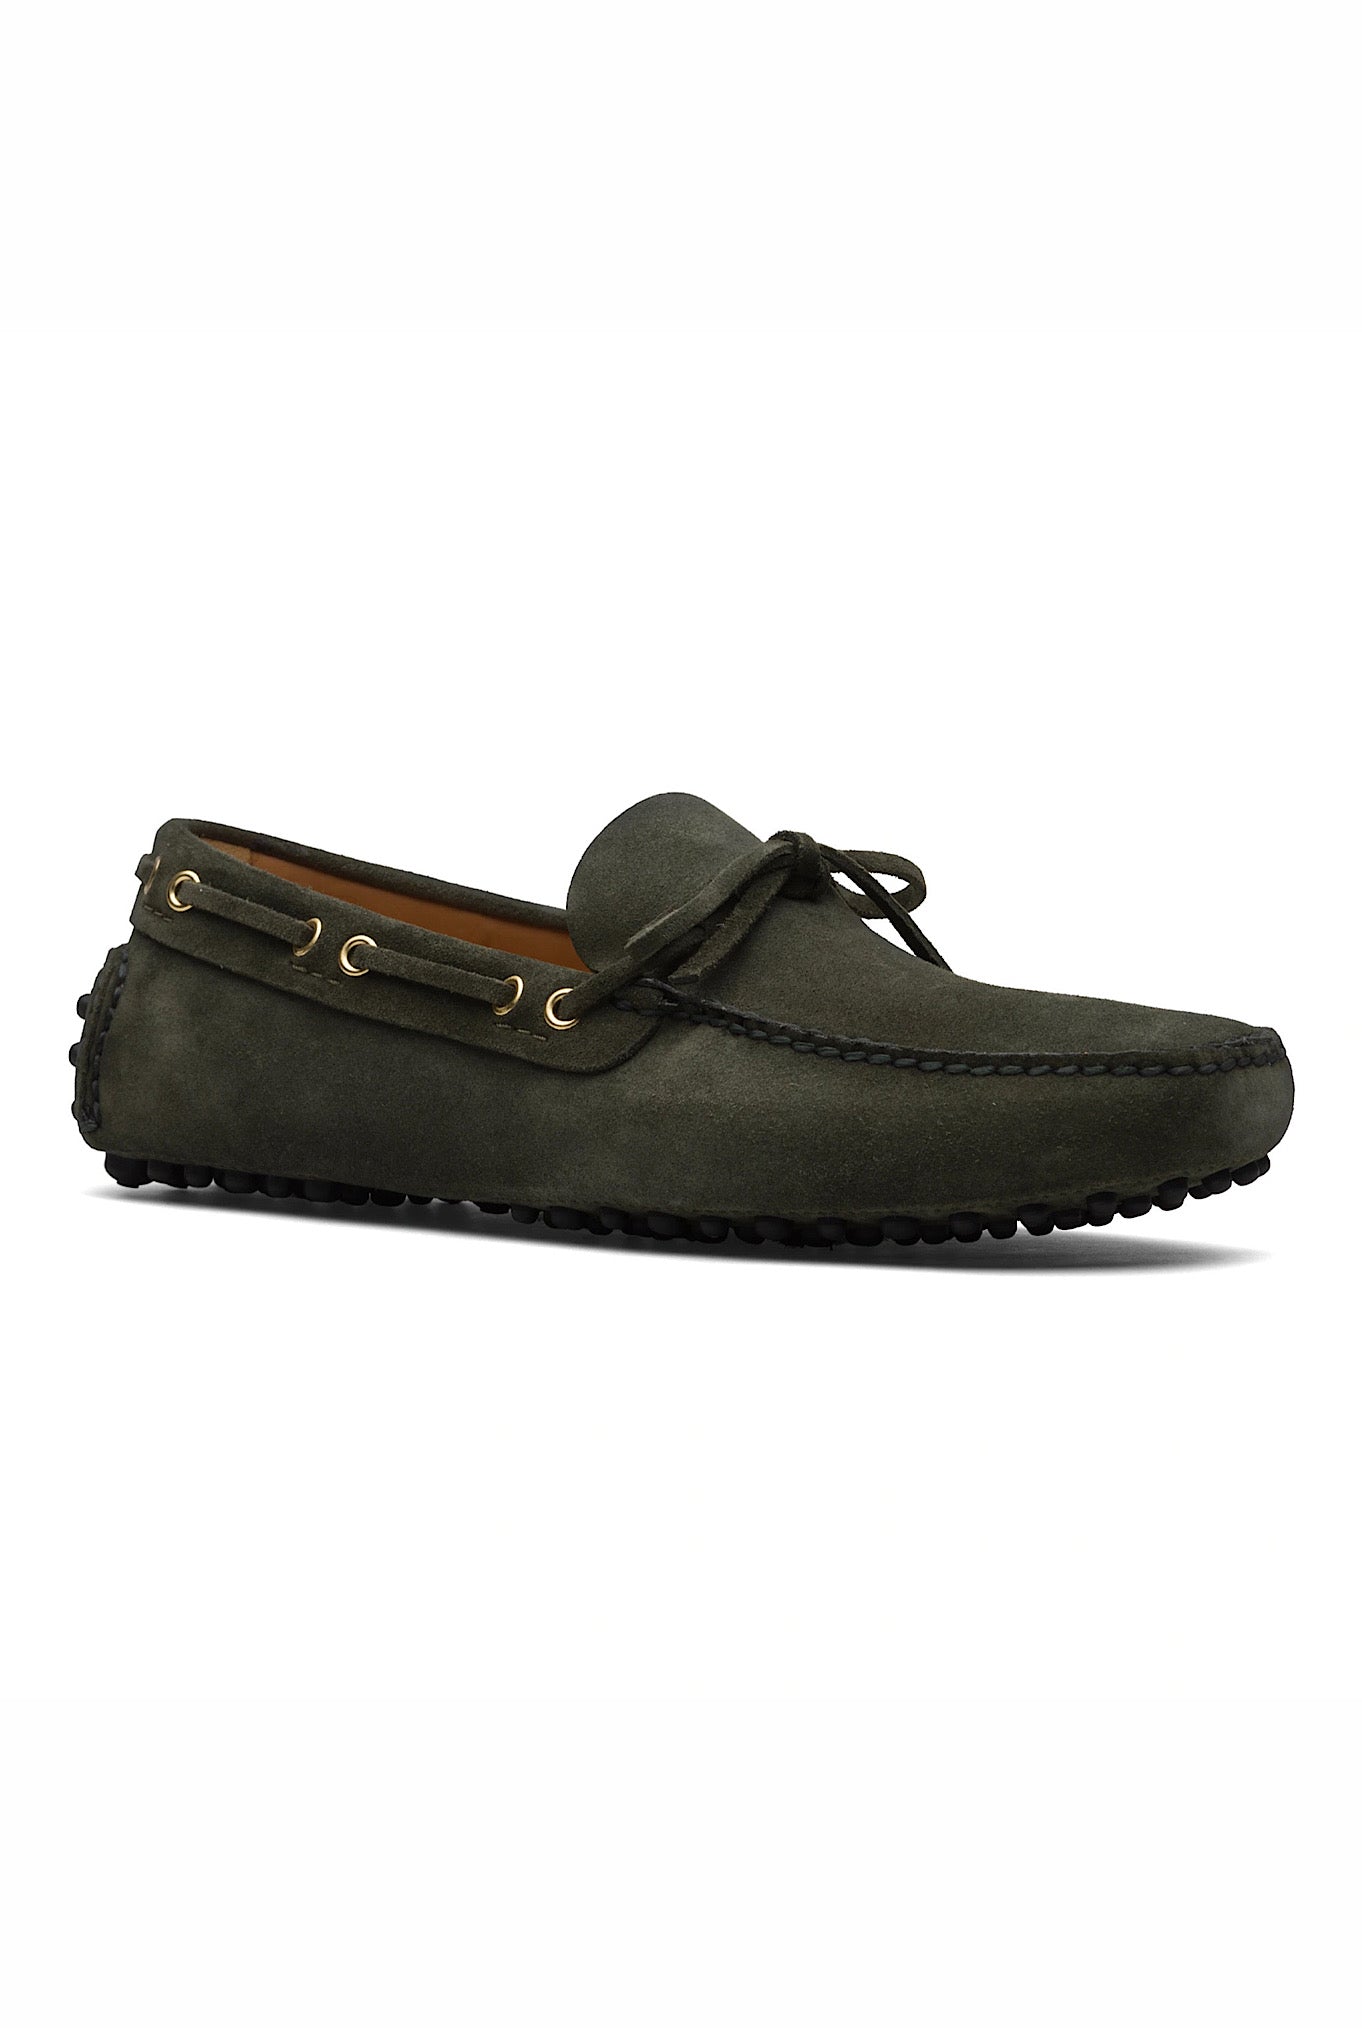 CAR SHOE Camouflage Green Suede Moccasin